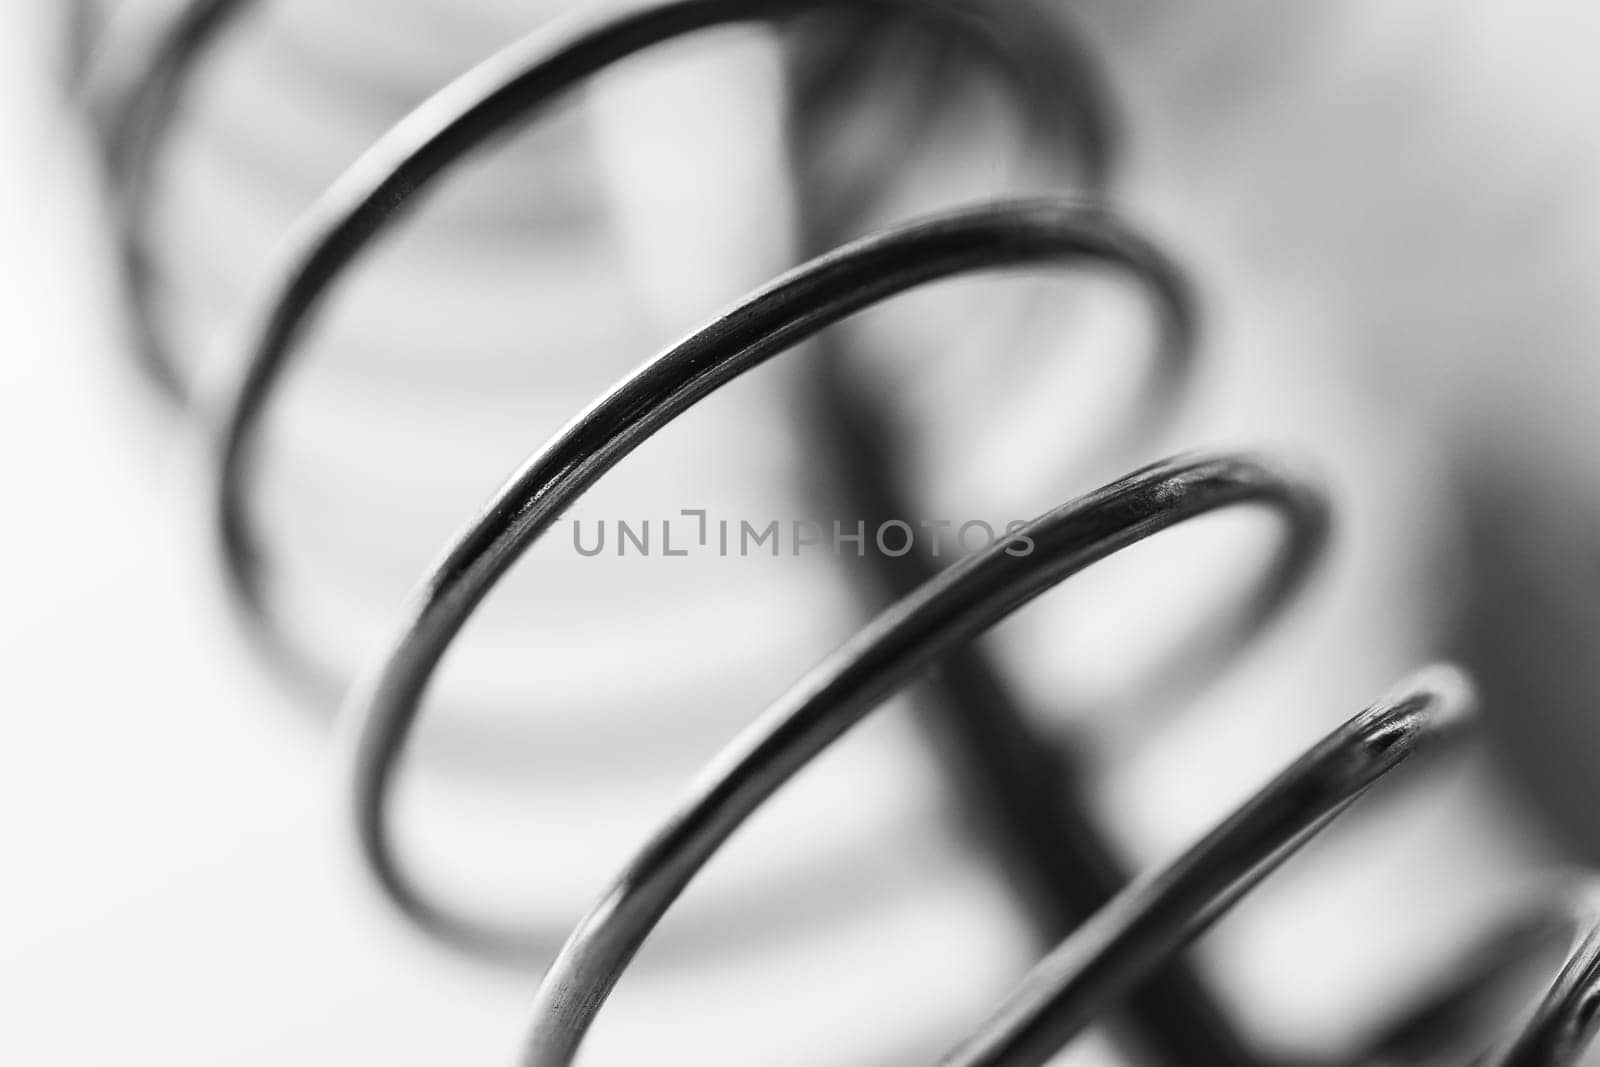 Metal spring coiled, black and white macro shot, soft focus, abstract industrial art